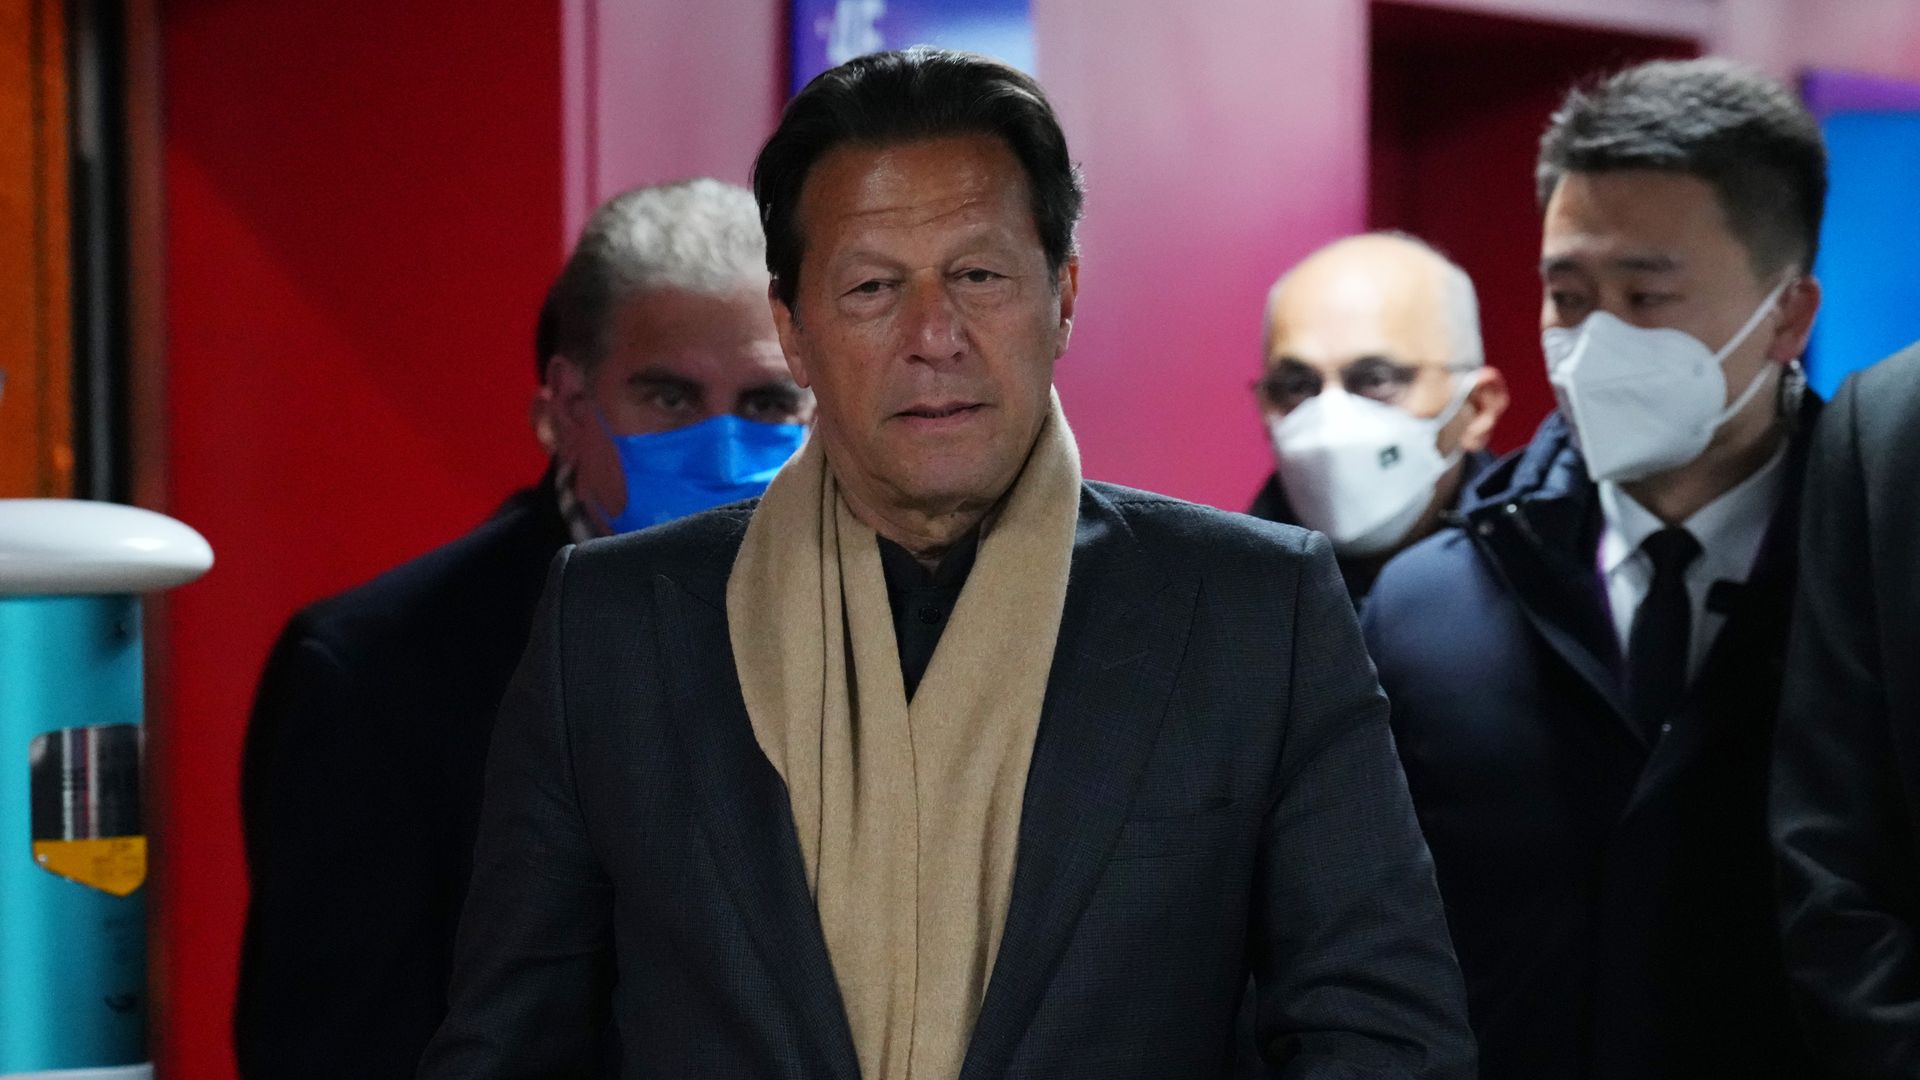 Imran Khan, Prime Minister of Pakistan arrives during the Opening Ceremony of the Beijing 2022 Winter Olympics at the Beijing National Stadium on February 04, 2022 in Beijing, China.